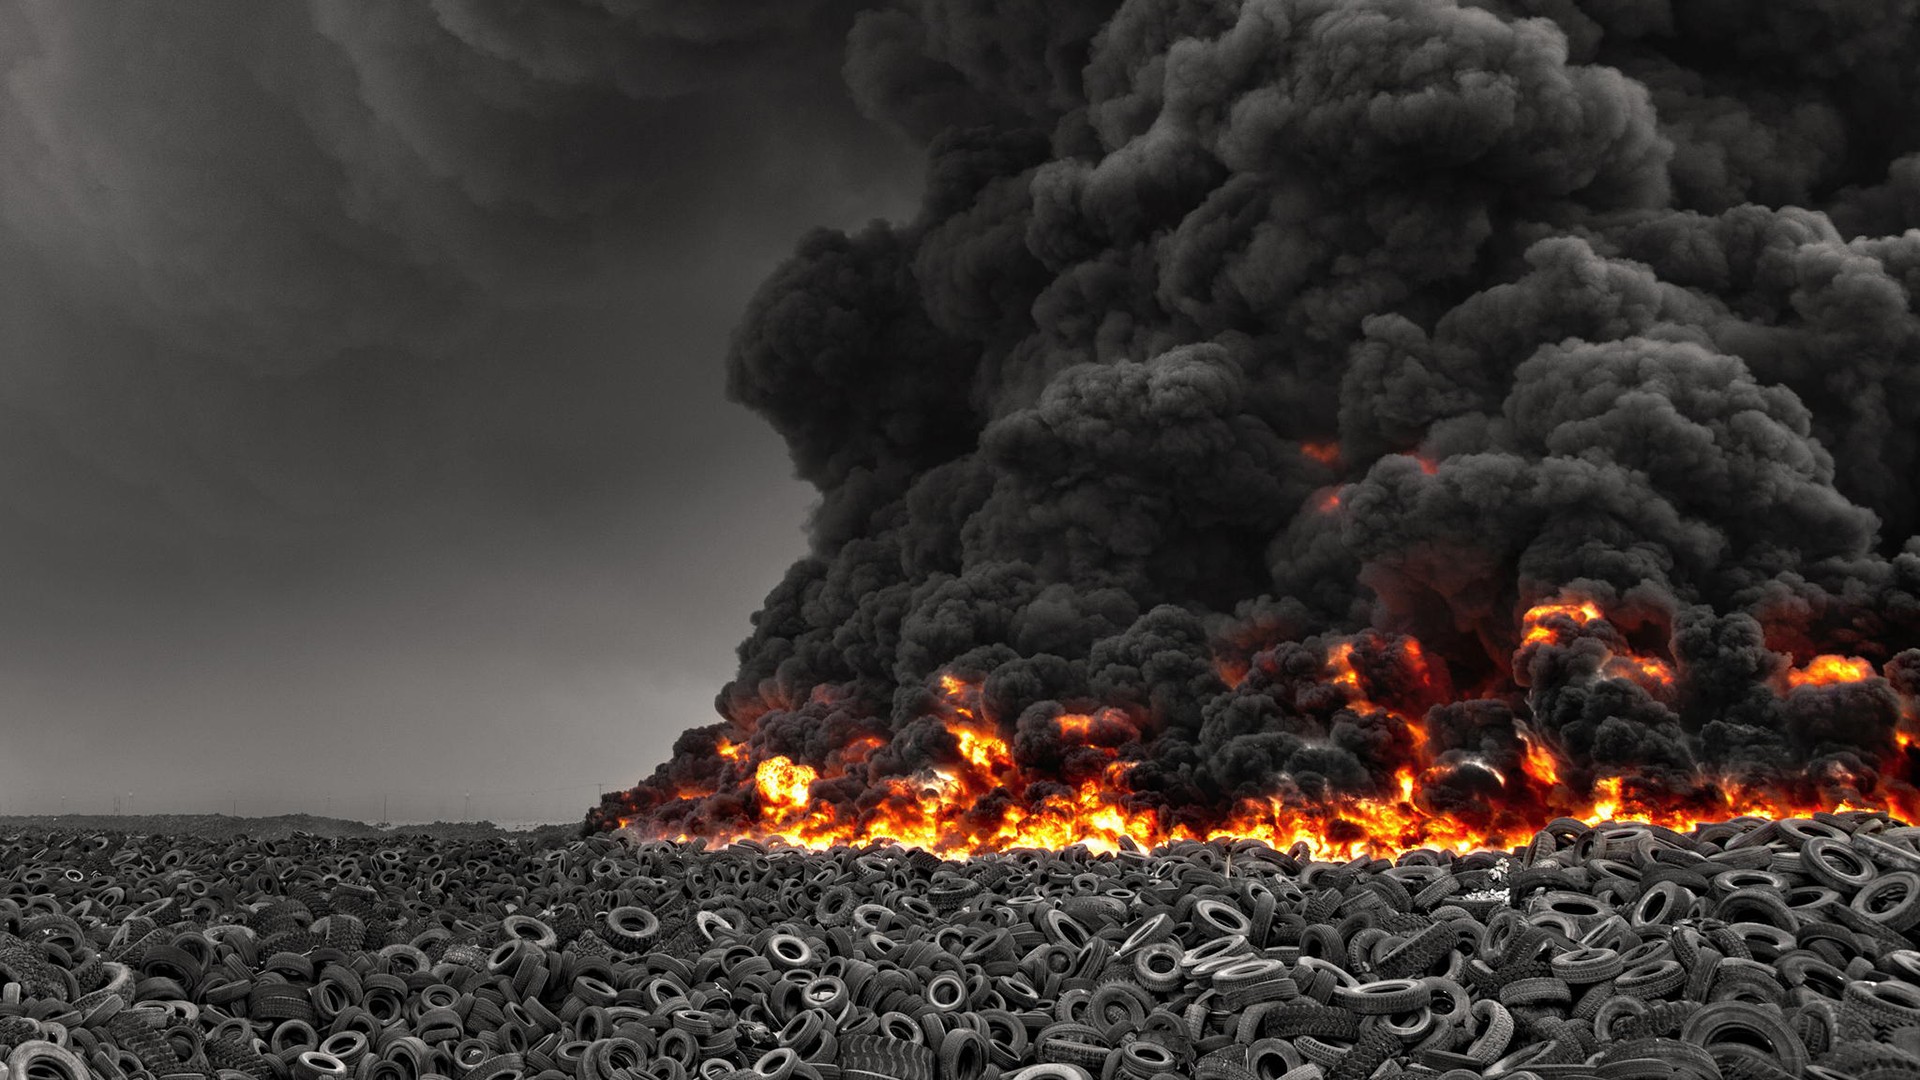 General 1920x1080 tires fire smoke black gray burning pollution environment selective coloring disaster global warming ecology